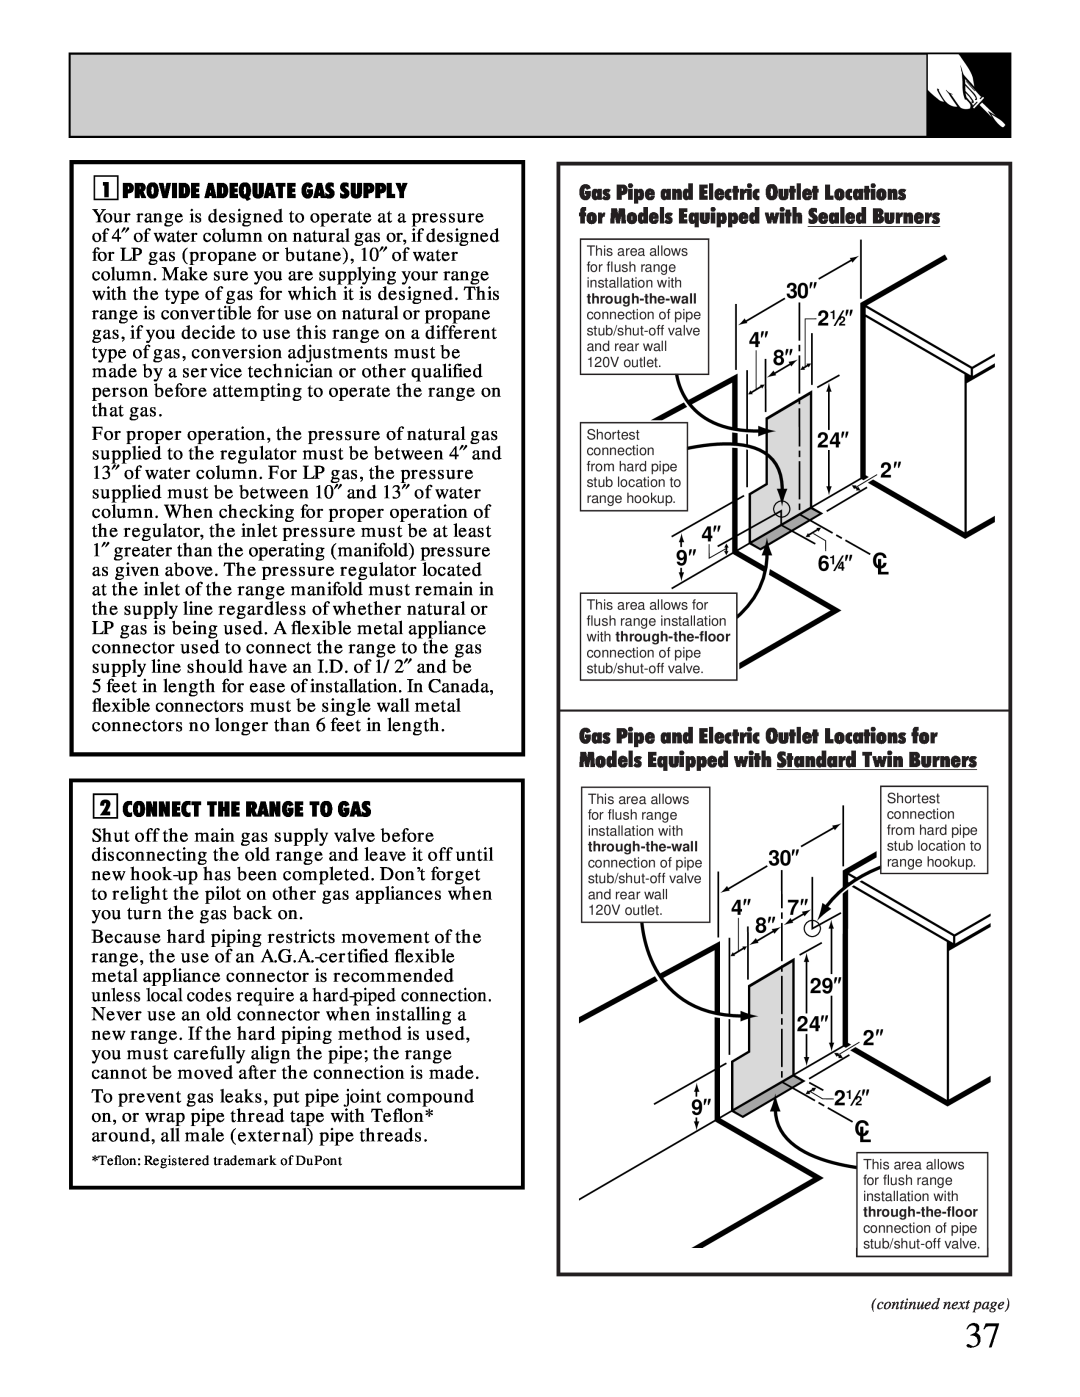 GE XL44 installation instructions Provide Adequate Gas Supply, Connect The Range To Gas, 21⁄2 4, 61⁄ C, 21⁄2 C L 